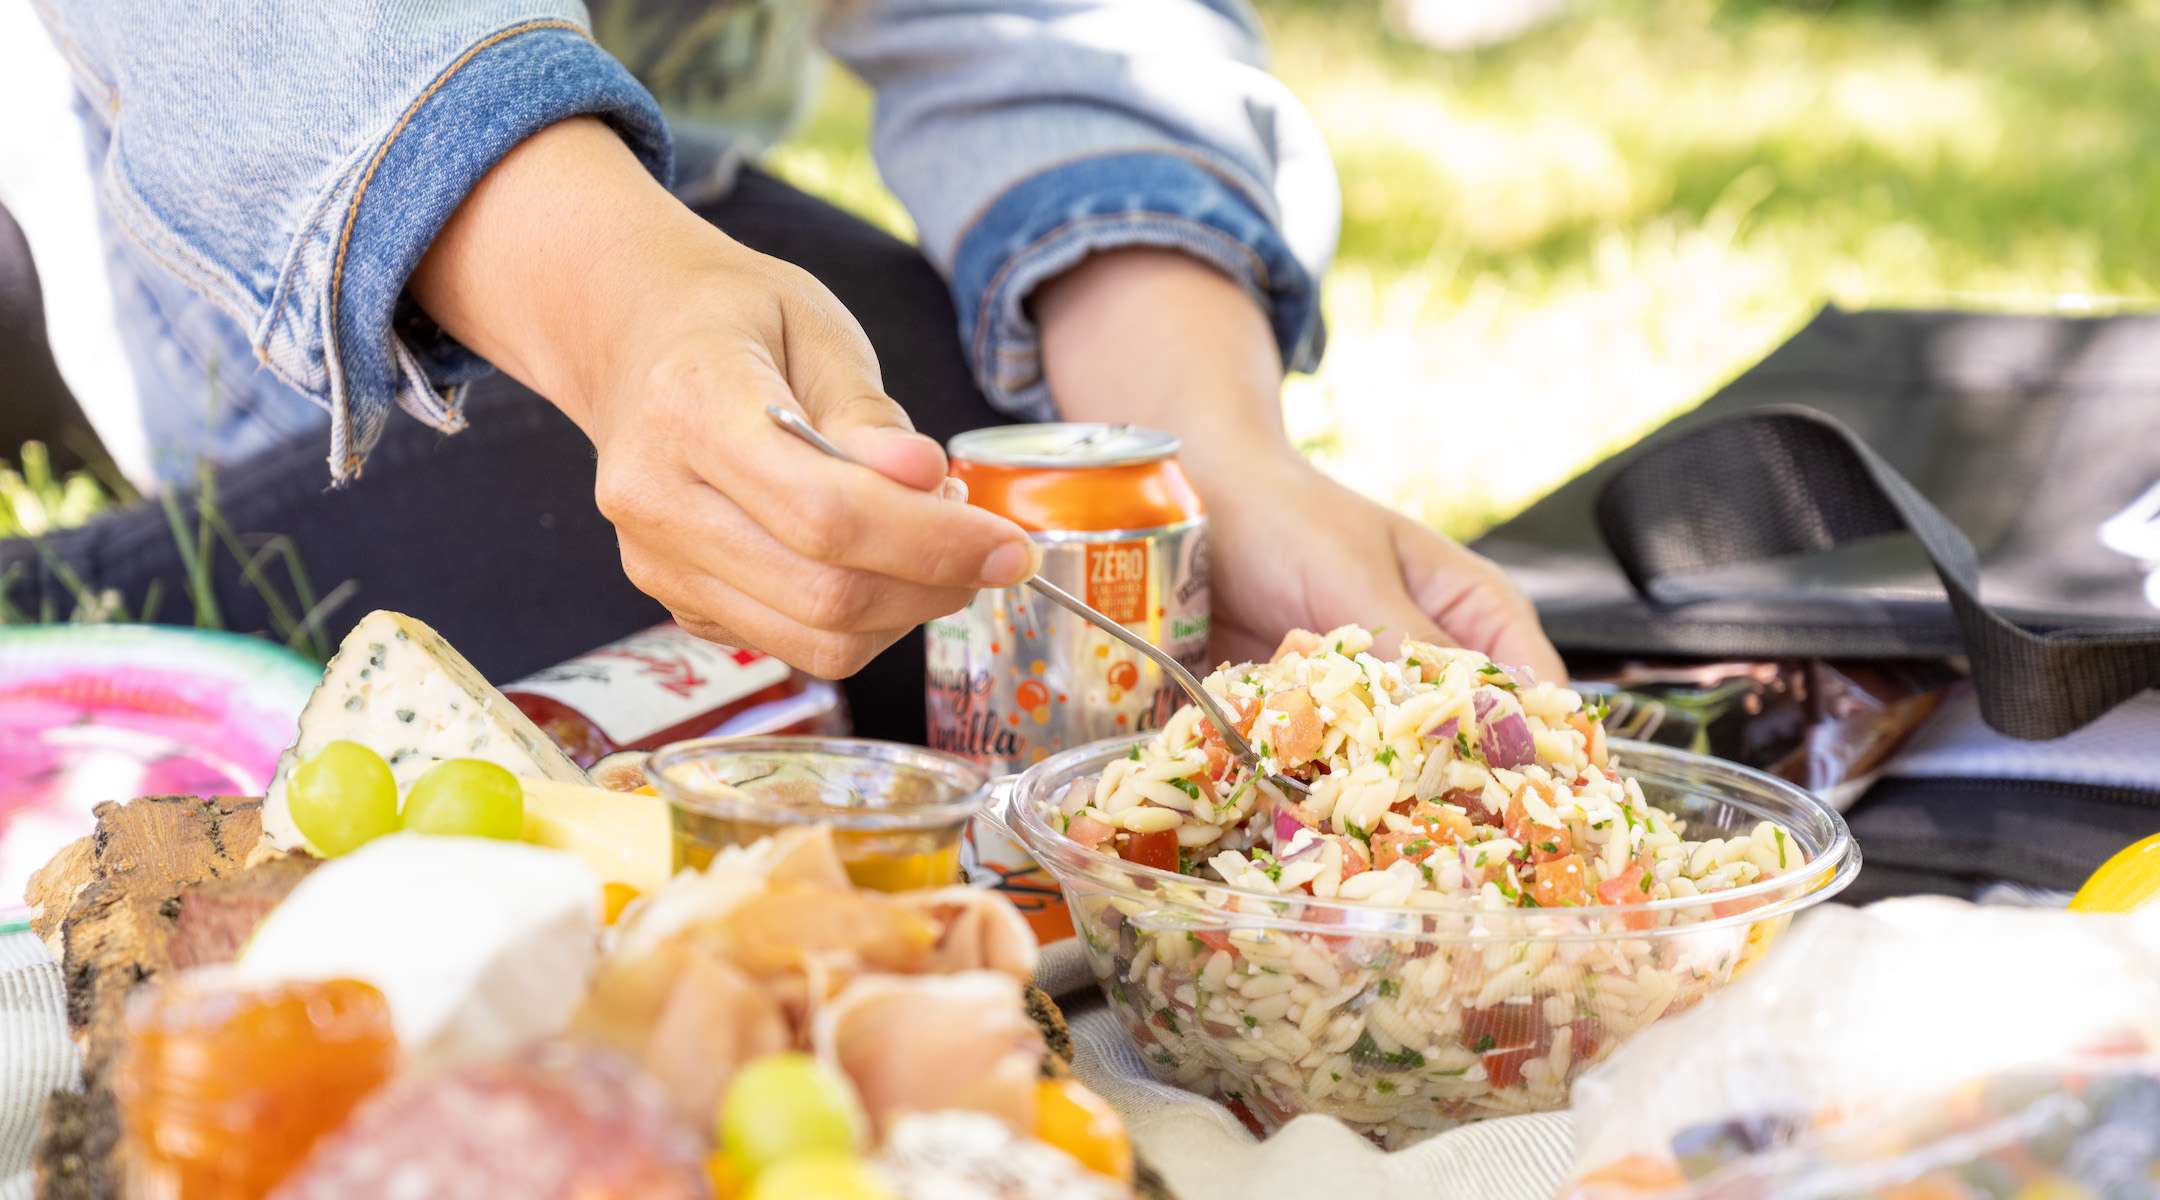 What to Pack in Your Summer Picnic - Salad